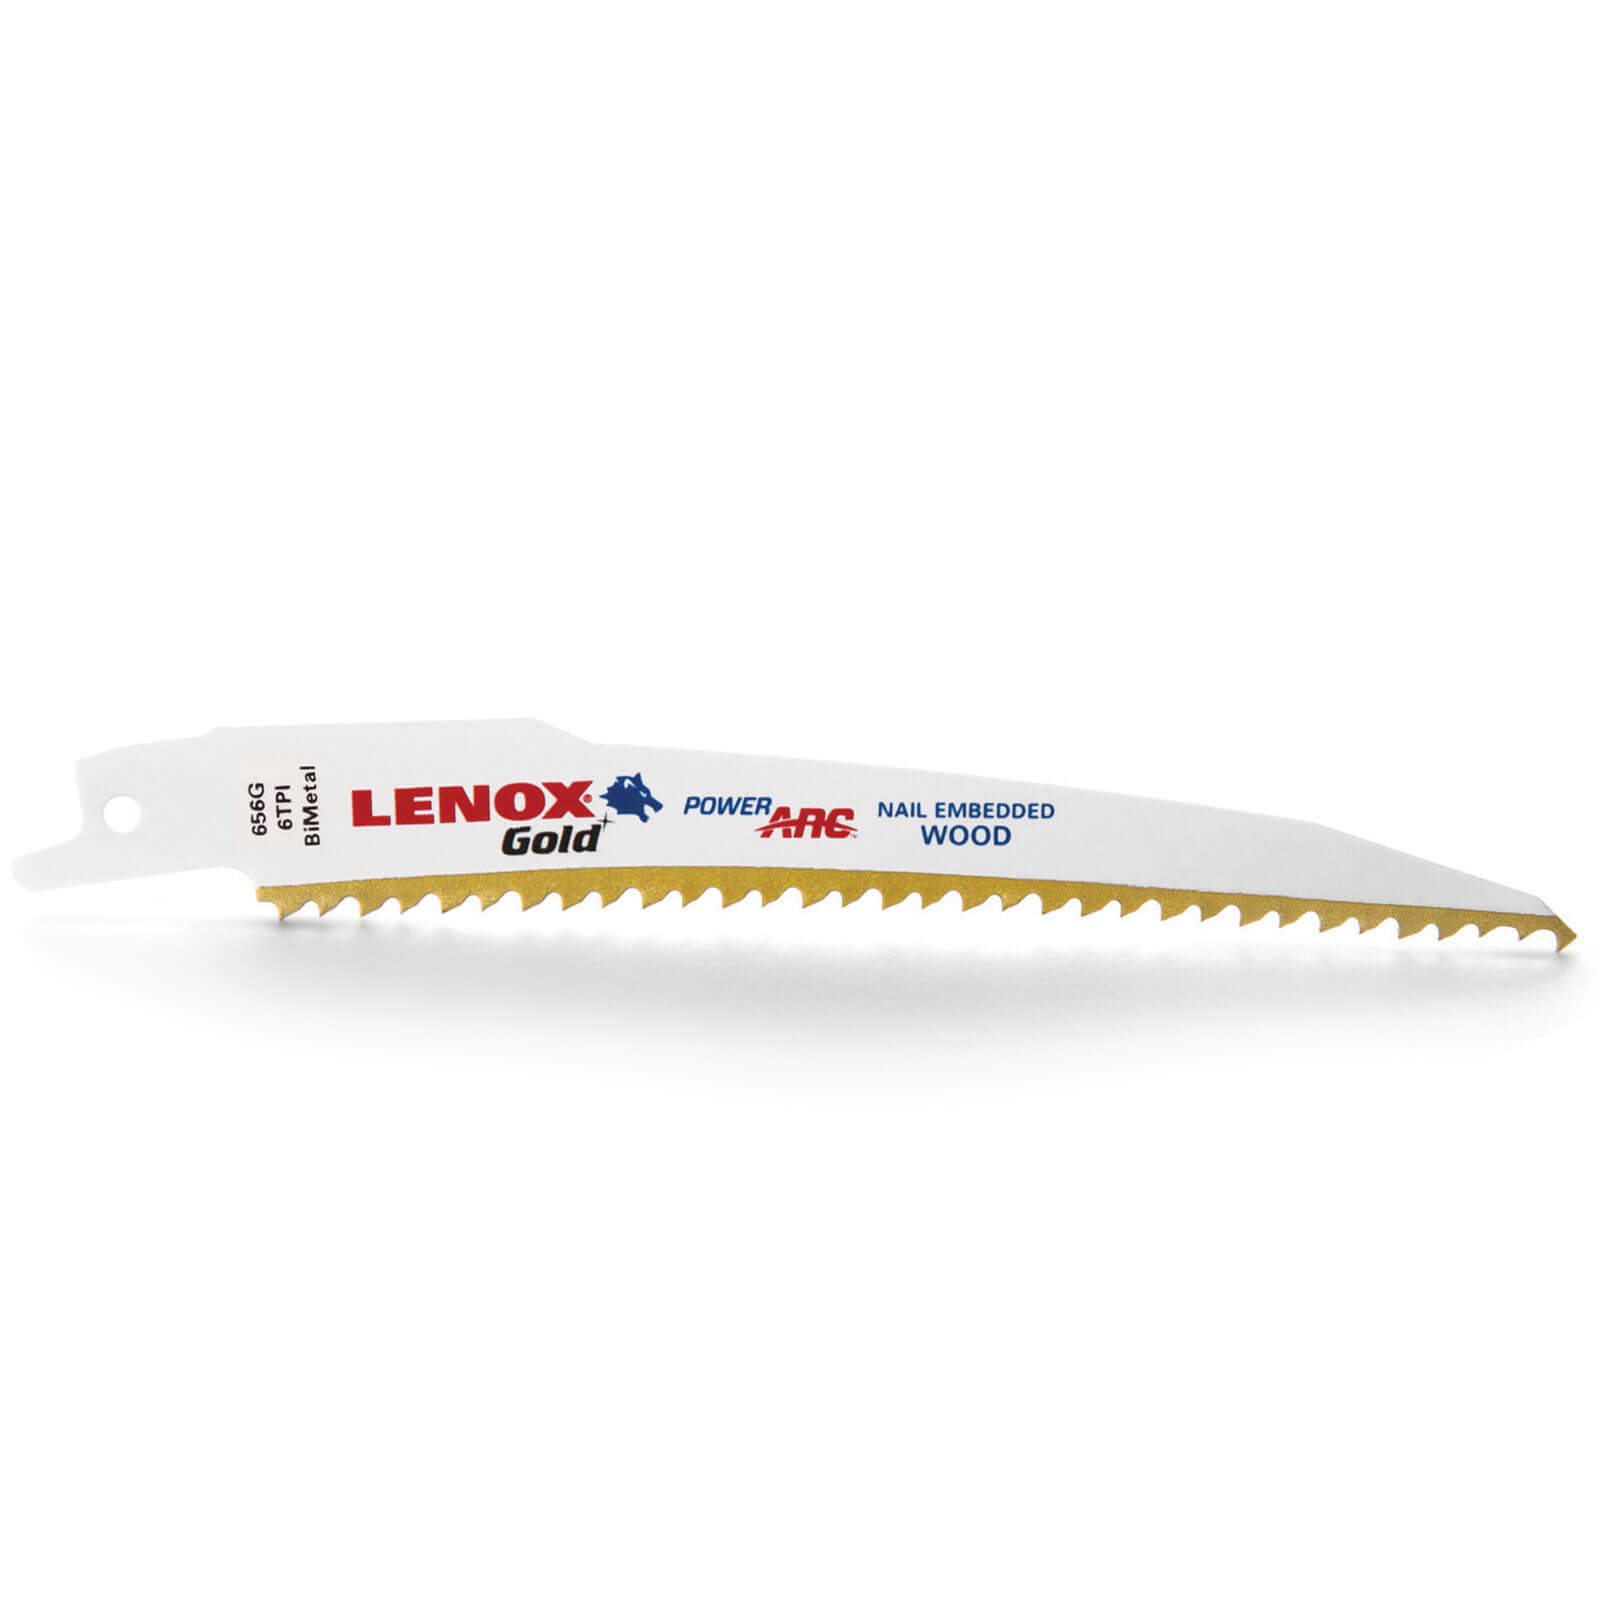 Image of Lenox Gold 6TPI Nail Embedded Wood Cutting Reciprocating Sabre Saw Blades 152mm Pack of 5